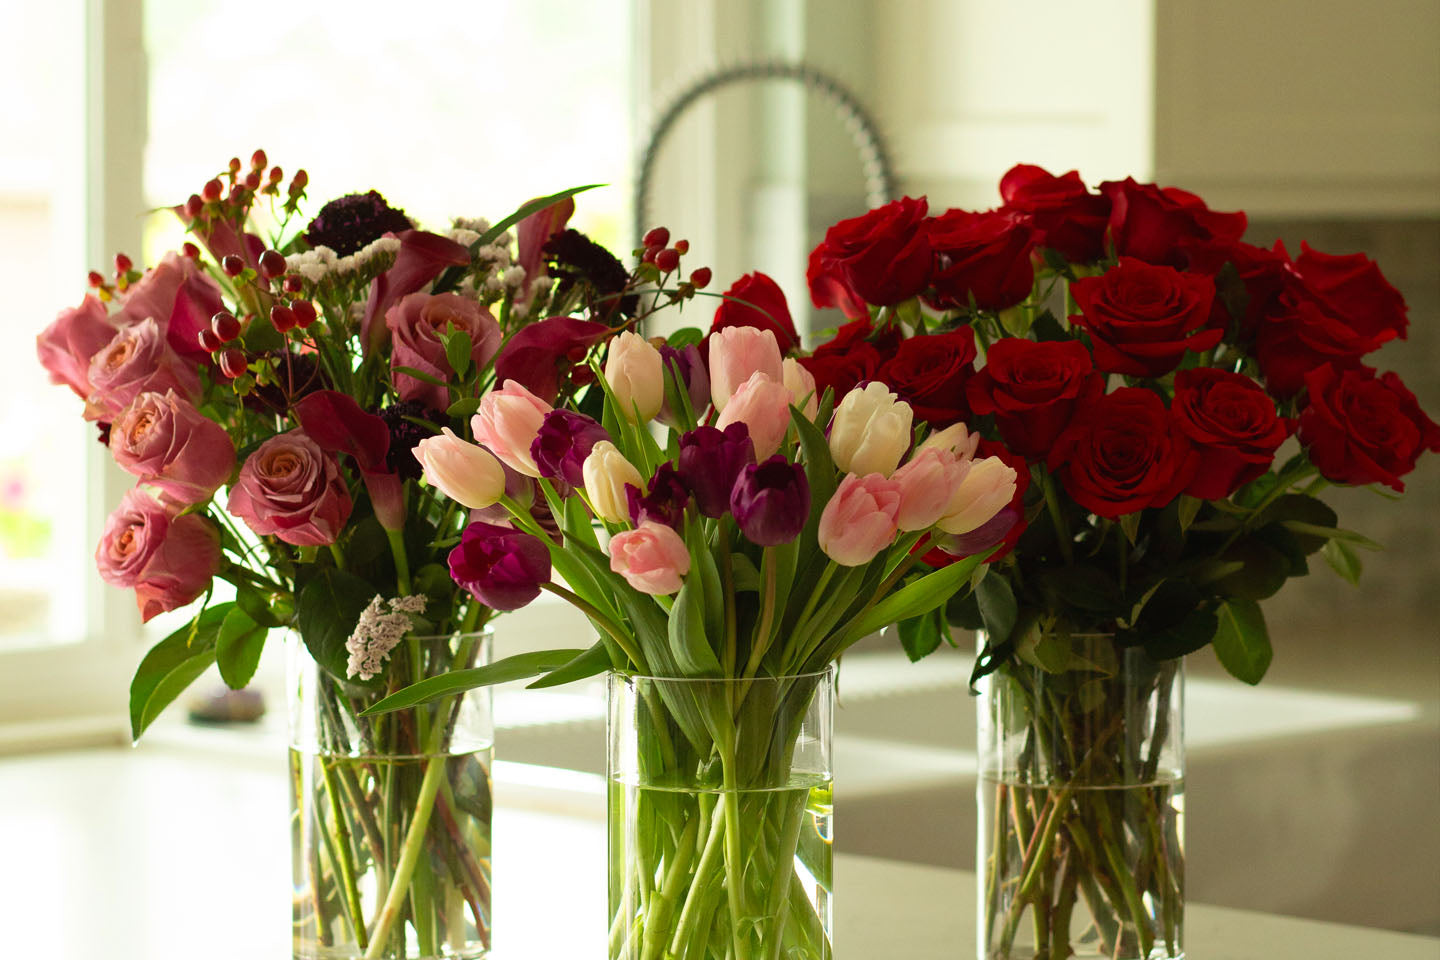 What Are The Most Sold Cut Flowers?